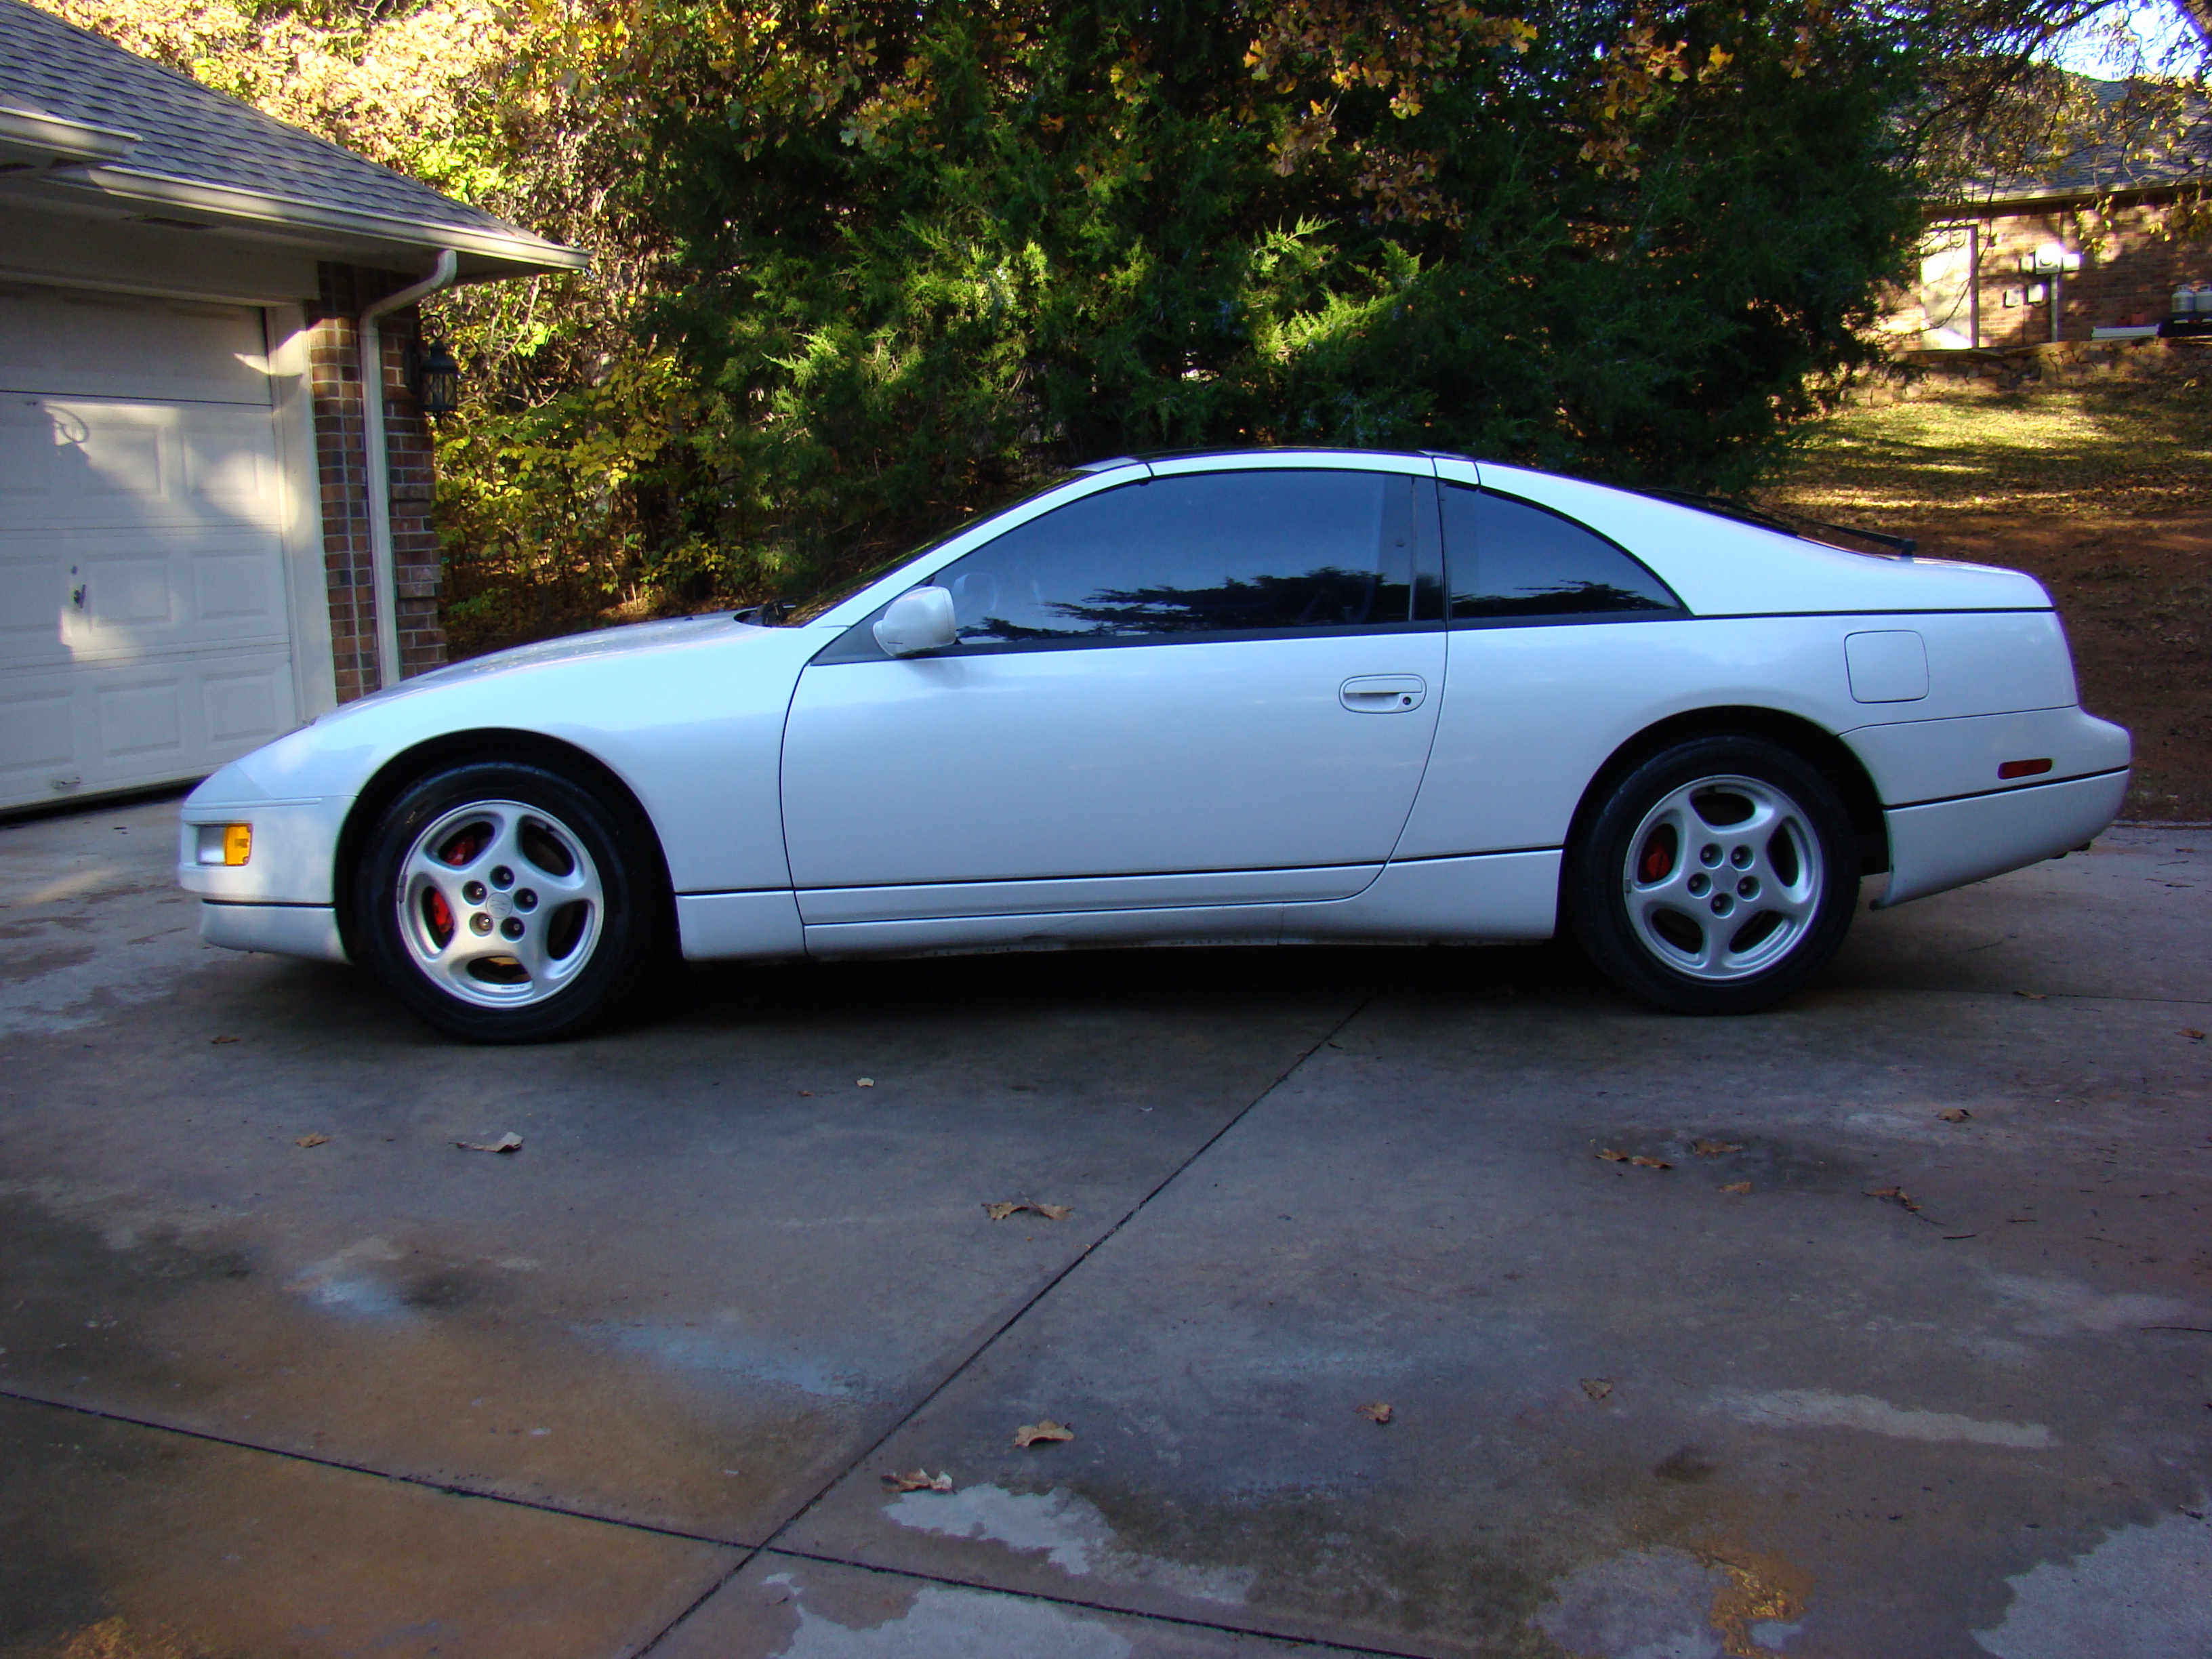 Pearl White 1996 300ZX 2+2 5-Speed – No Longer For Sale